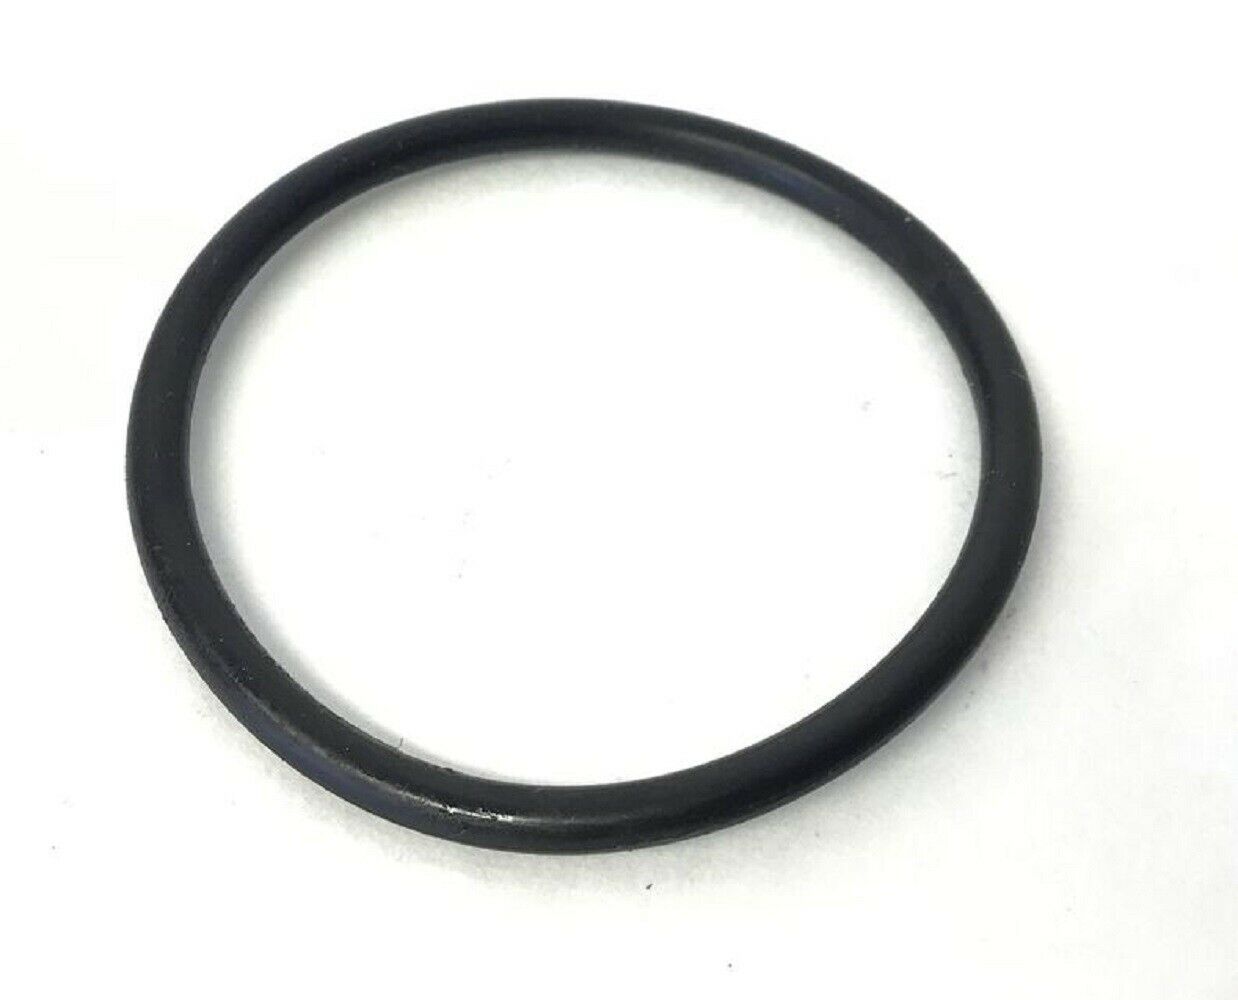 Lifecore LC985VG Elliptical Arm Leg Joint O-Ring Rubber (Used)